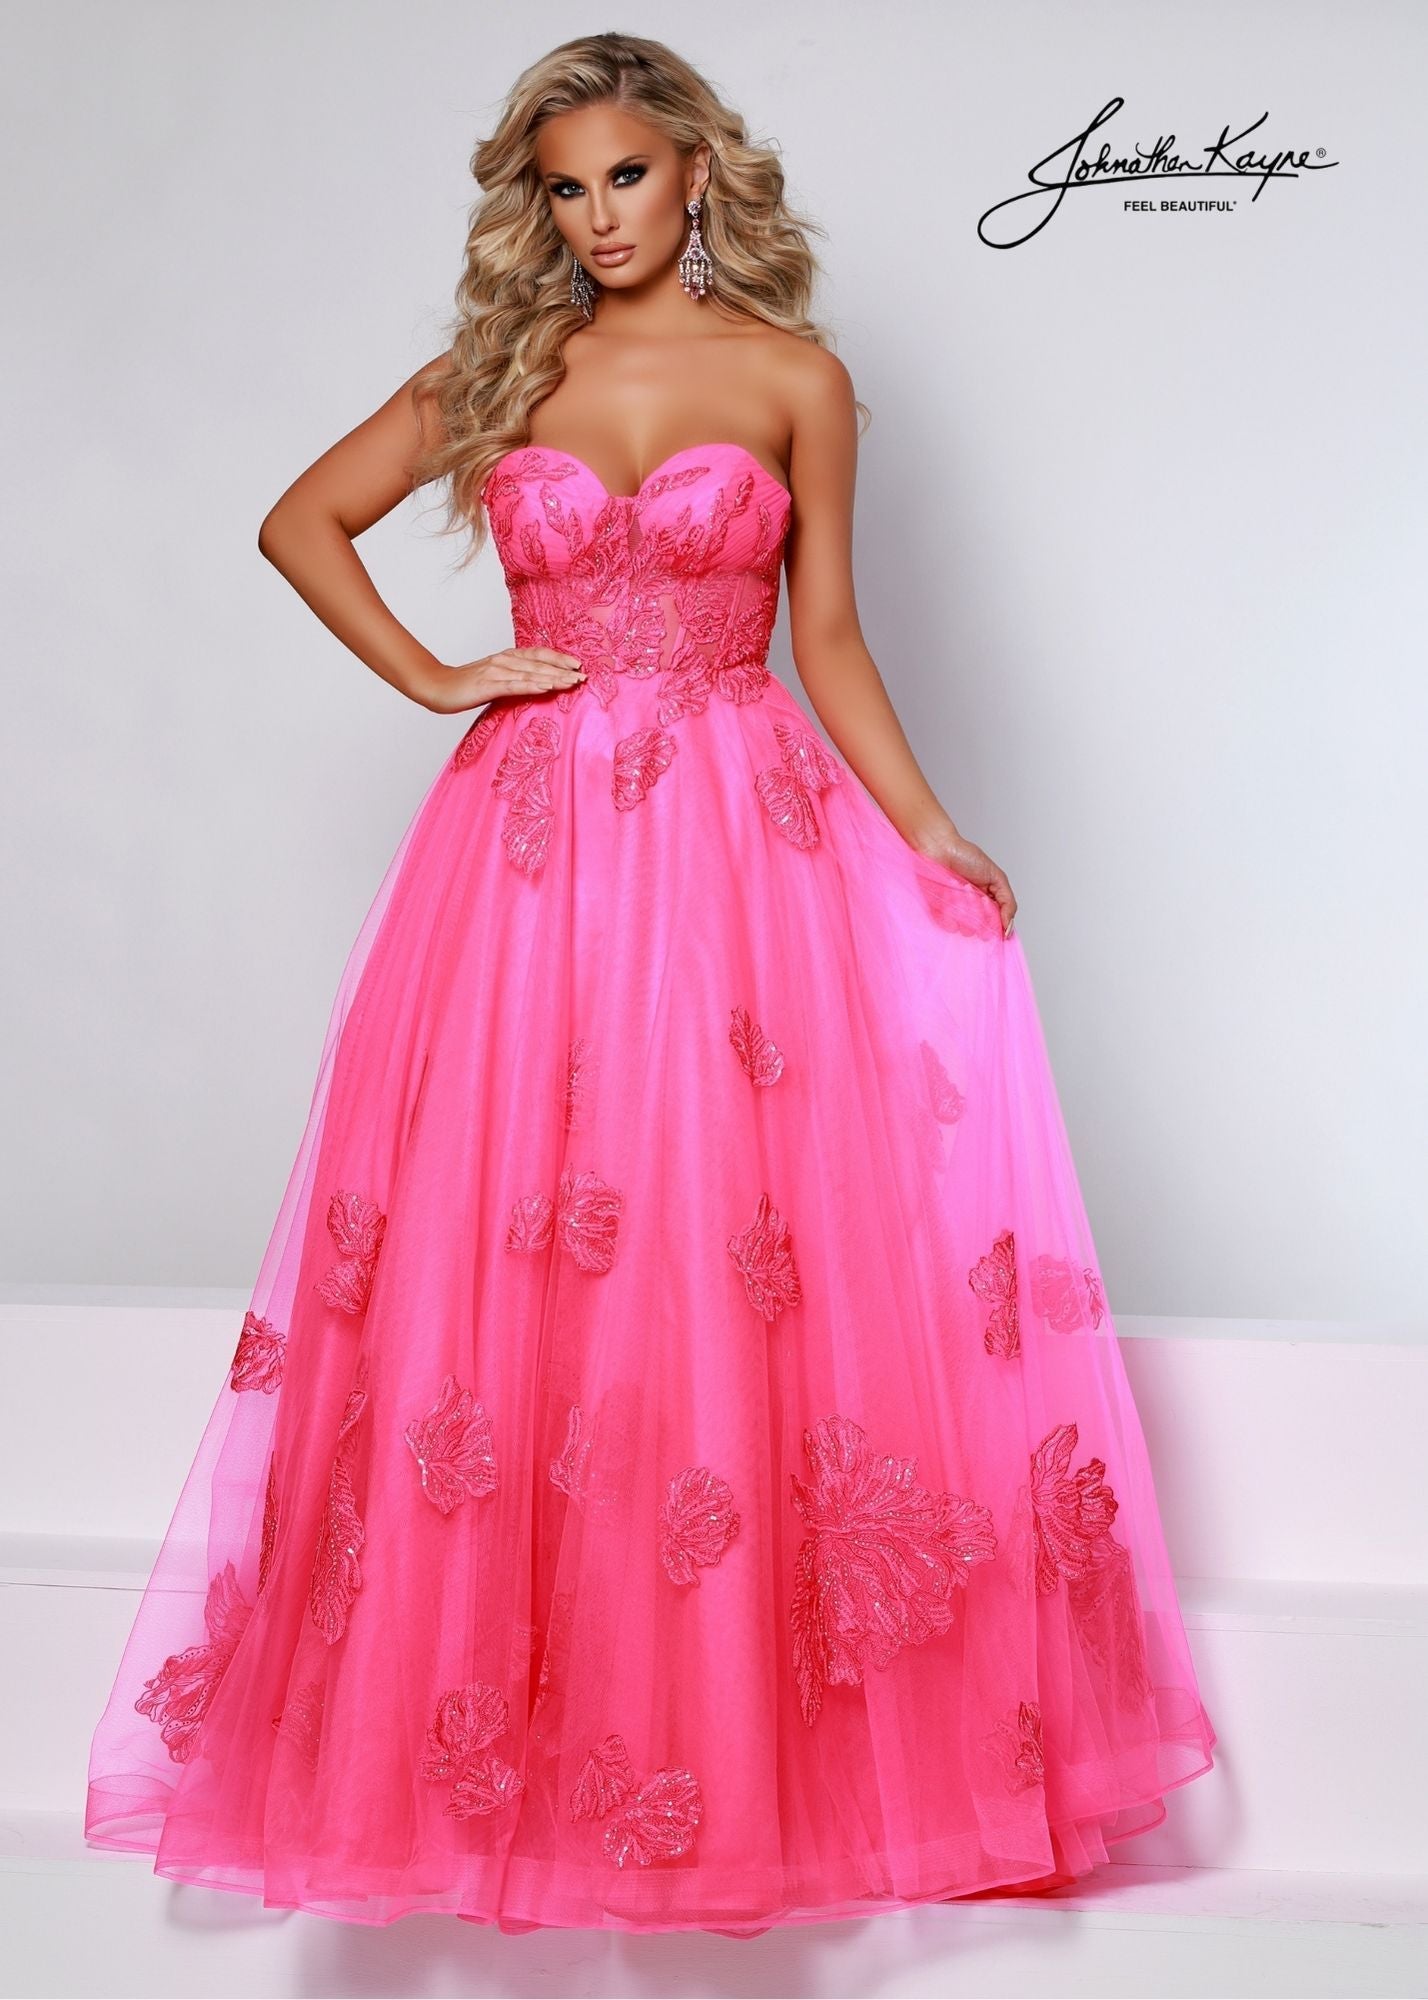 Johnathan Kayne 2518 Long A Line Sequin Lace Sheer Corset Formal Dress Prom Pageant Pockets  Sizes: 00, 0, 2, 4, 6, 8, 10, 12, 14, 16  Colors: Barbie Pink, Royal